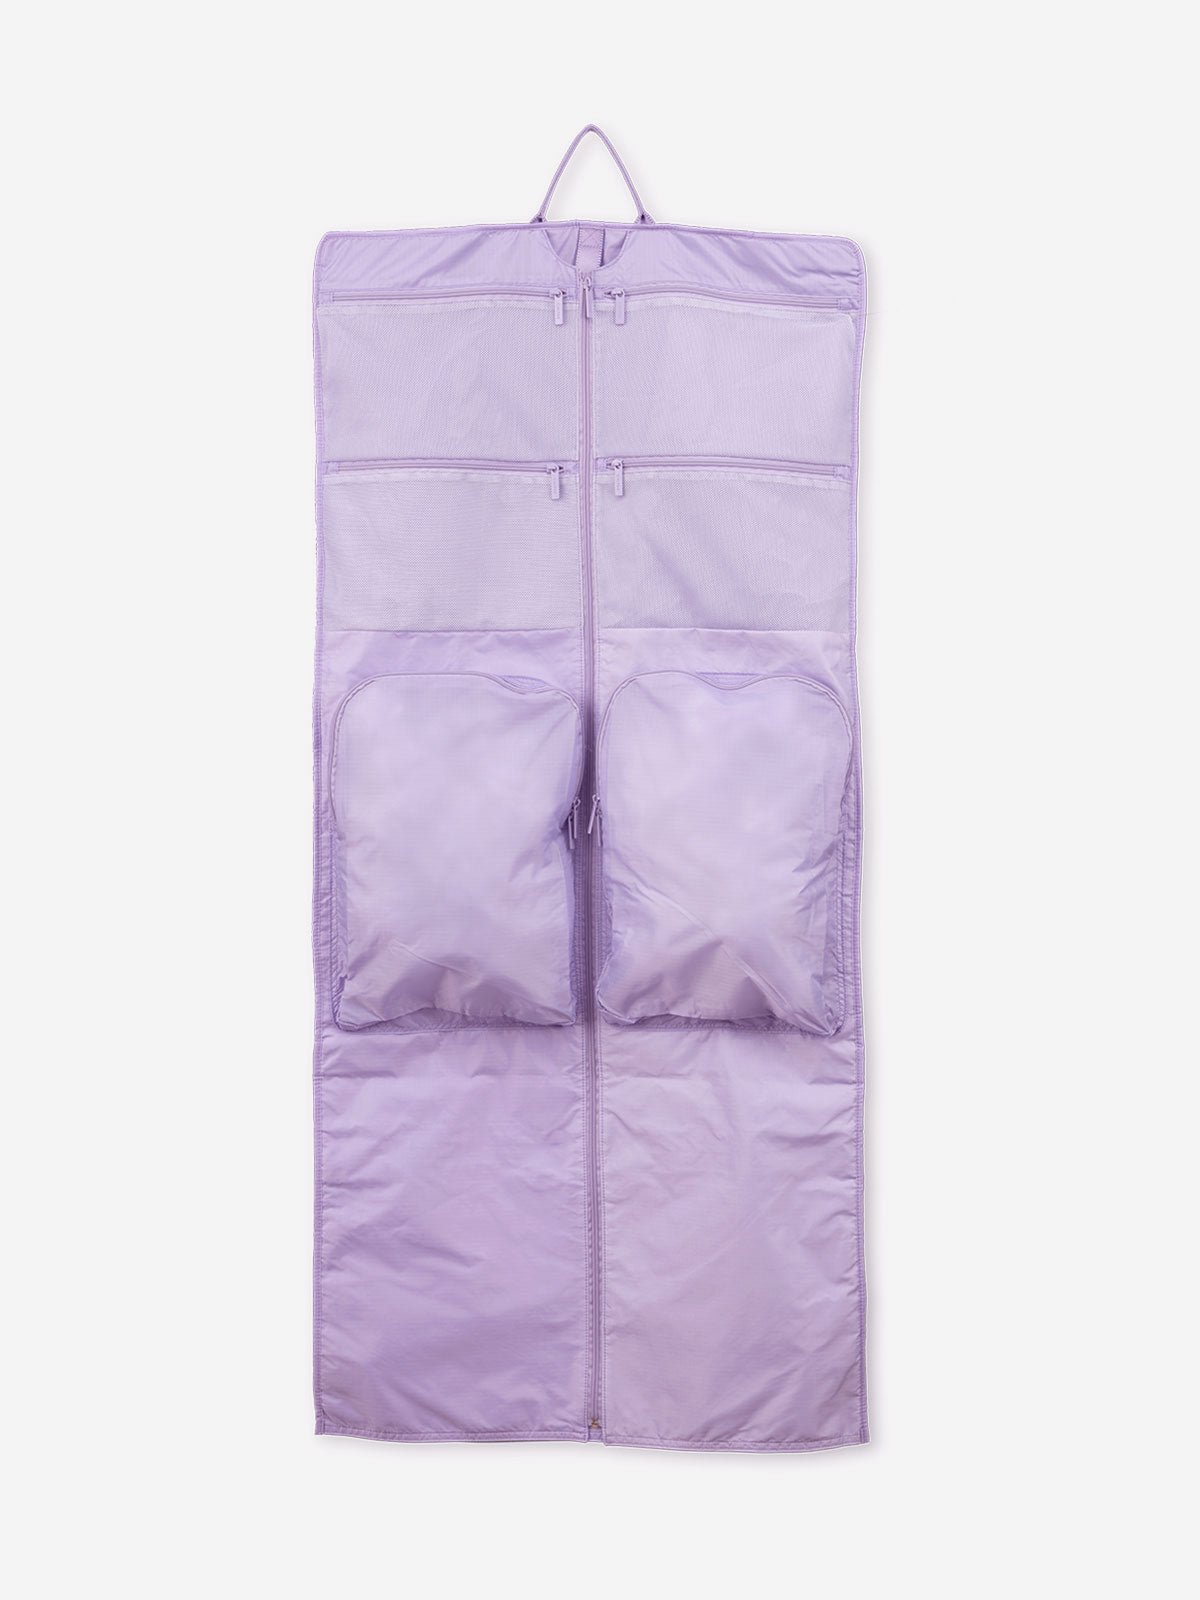 CALPAK Compakt large travel garment bag with water resistant ripstop nylon fabric and multiple pockets in orchid